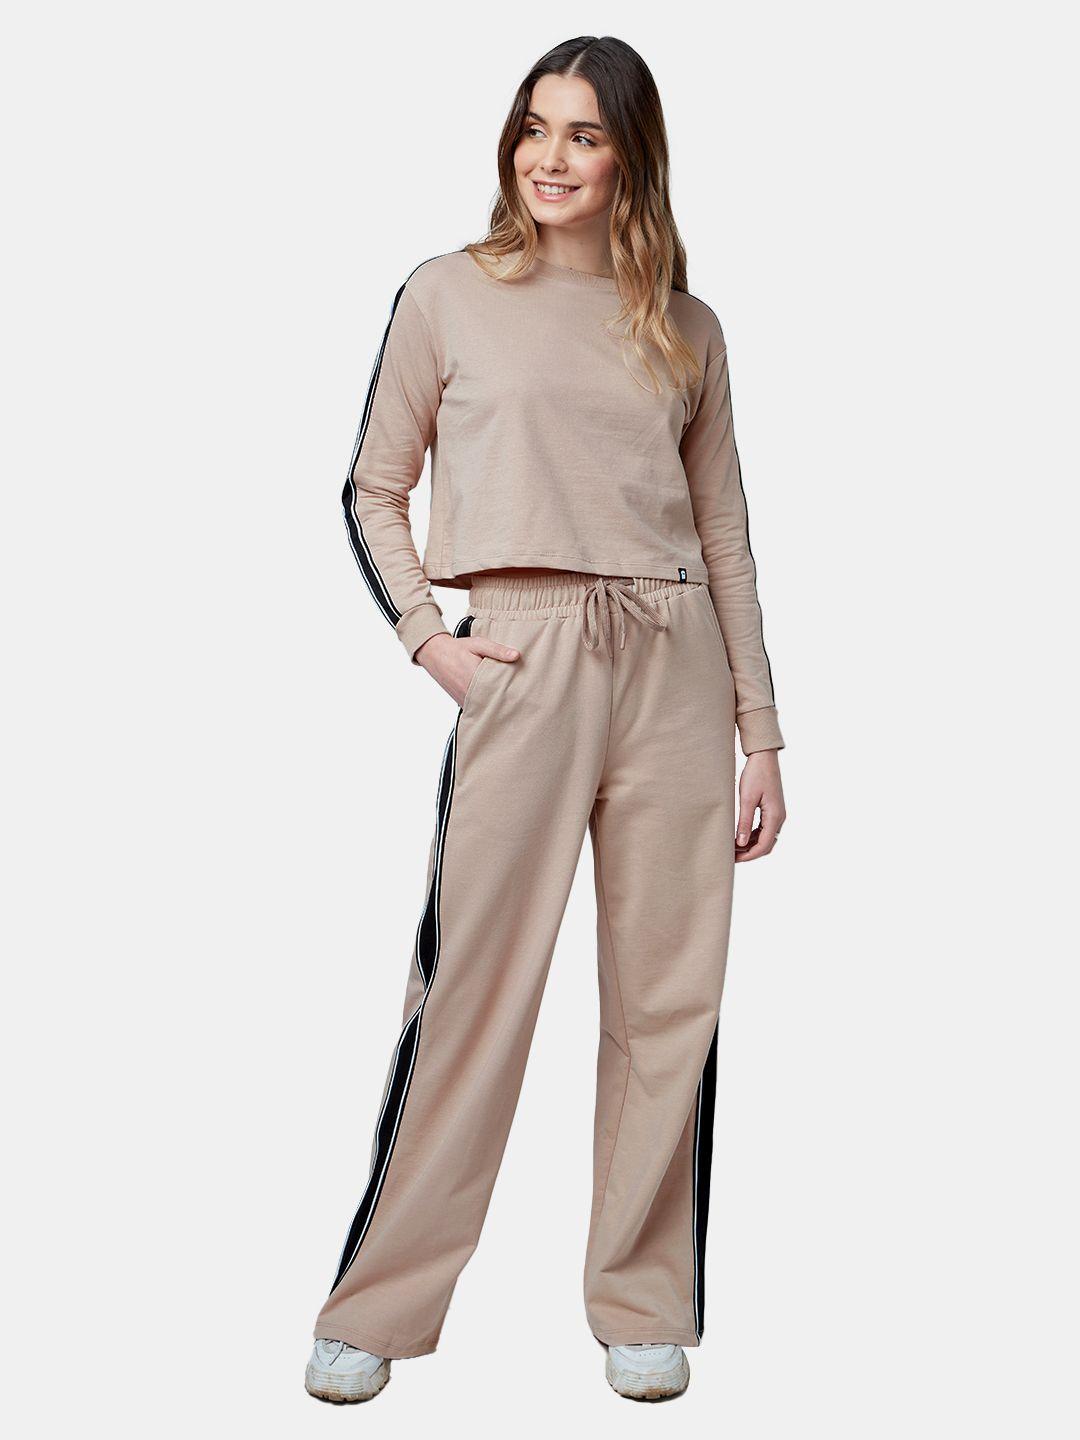 the souled store women brown co-ord set